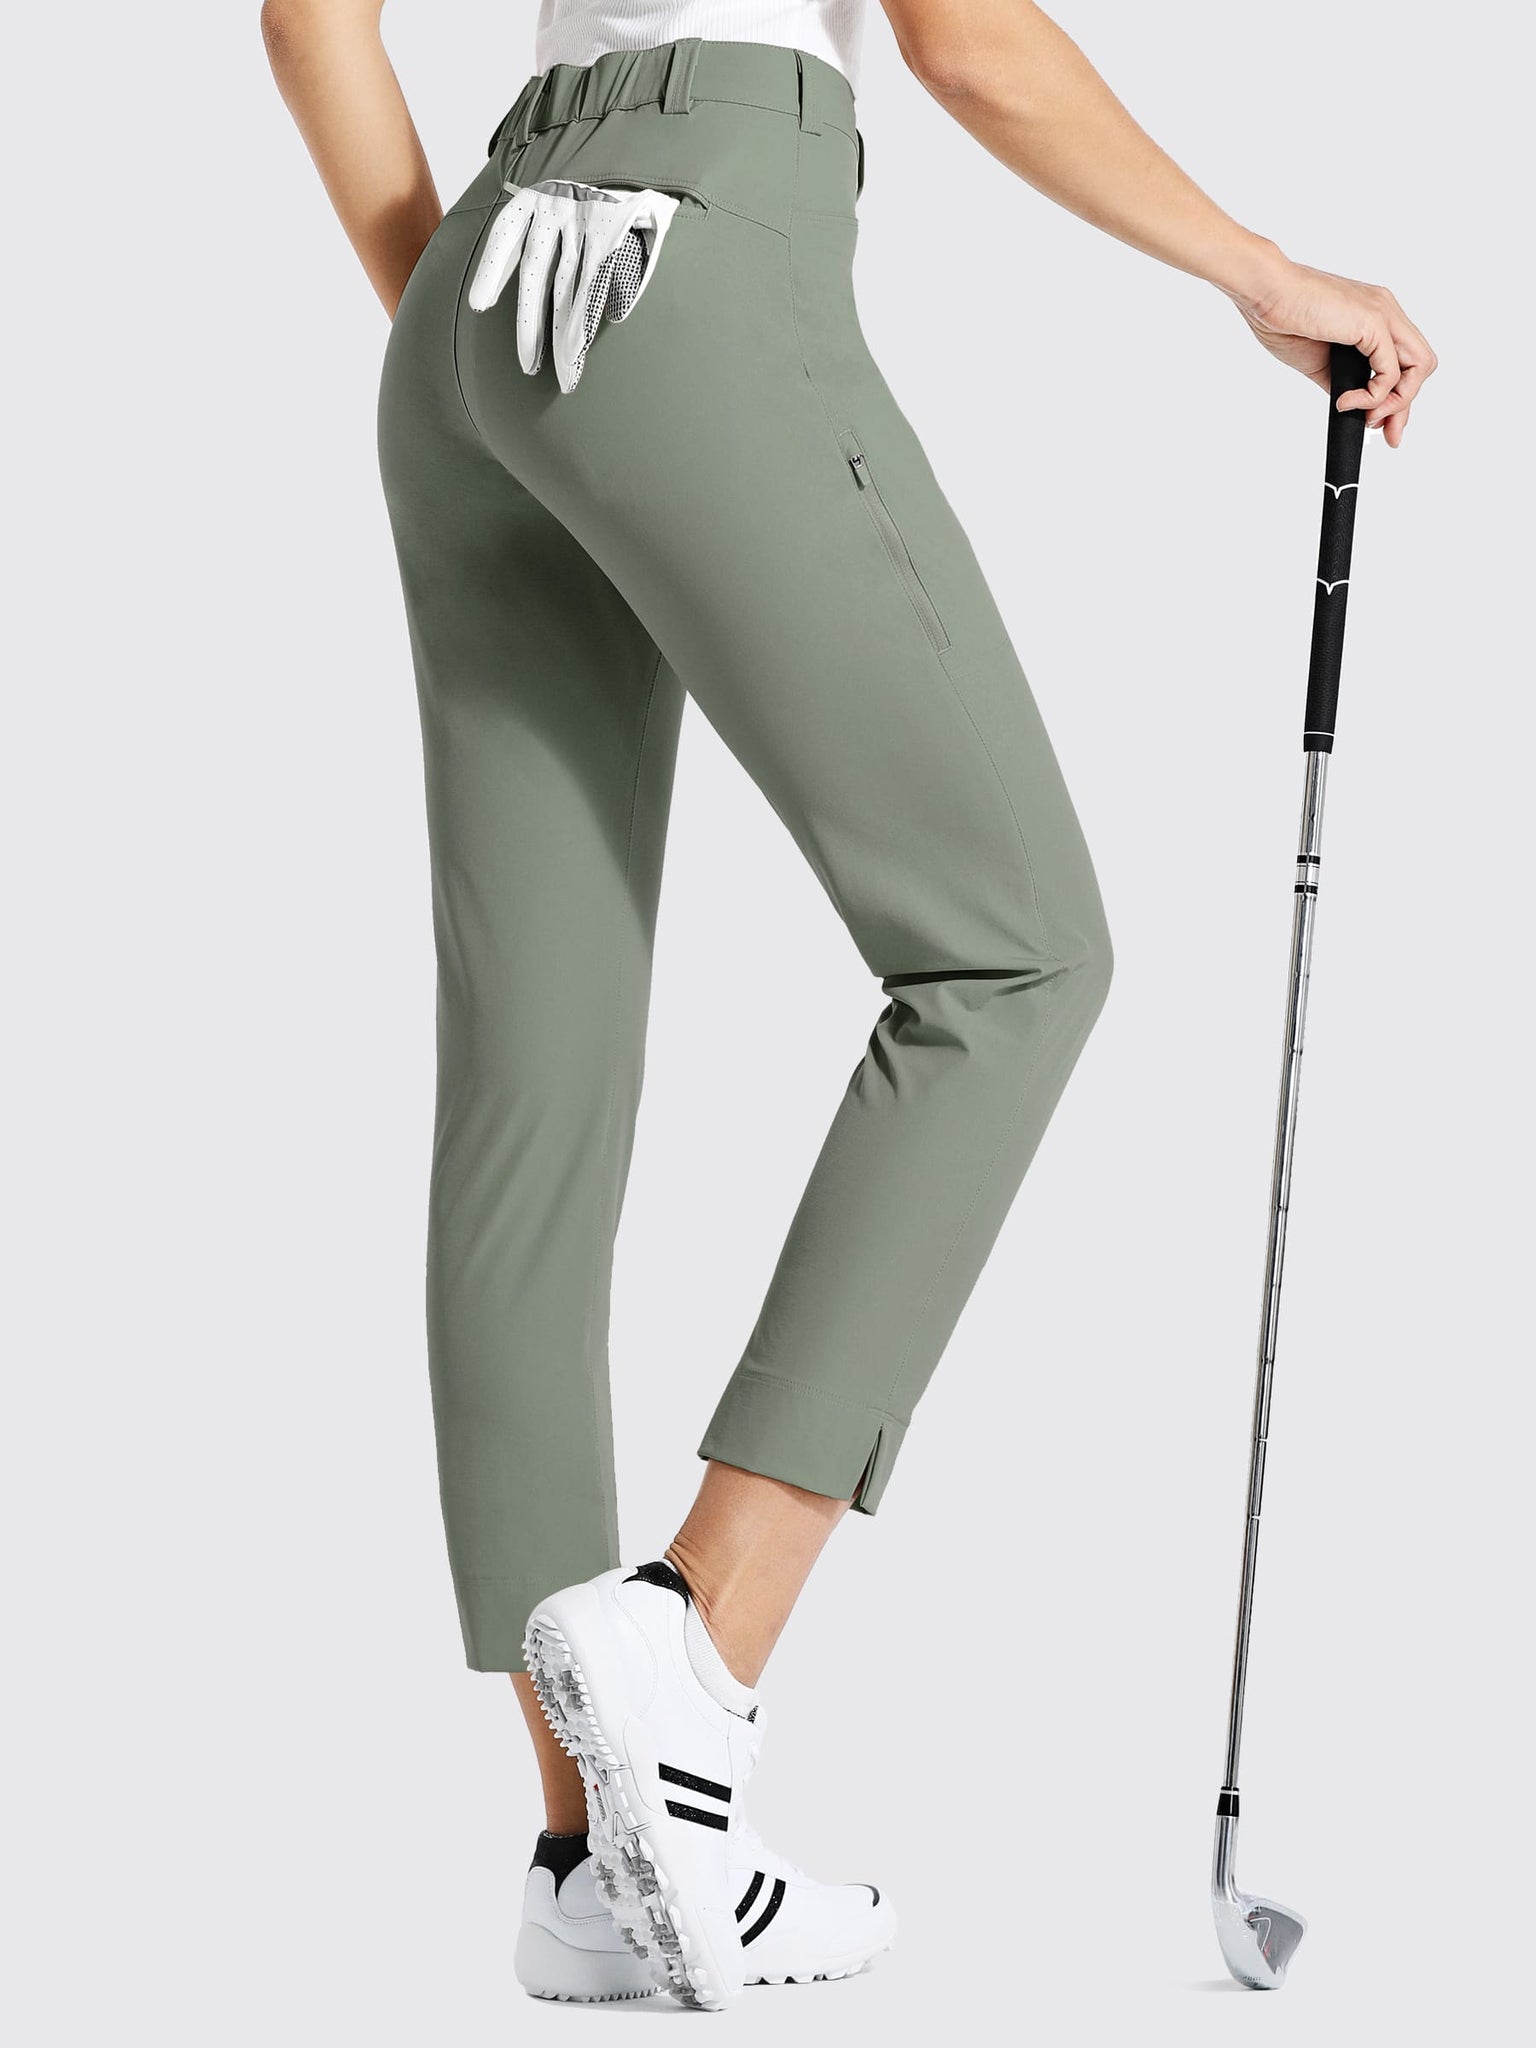 ZUTY Womens Golf Pants Lightweight Quick Dry Hiking Work Ankle Dress Pants  Casual Stretch Lounge Business Travel